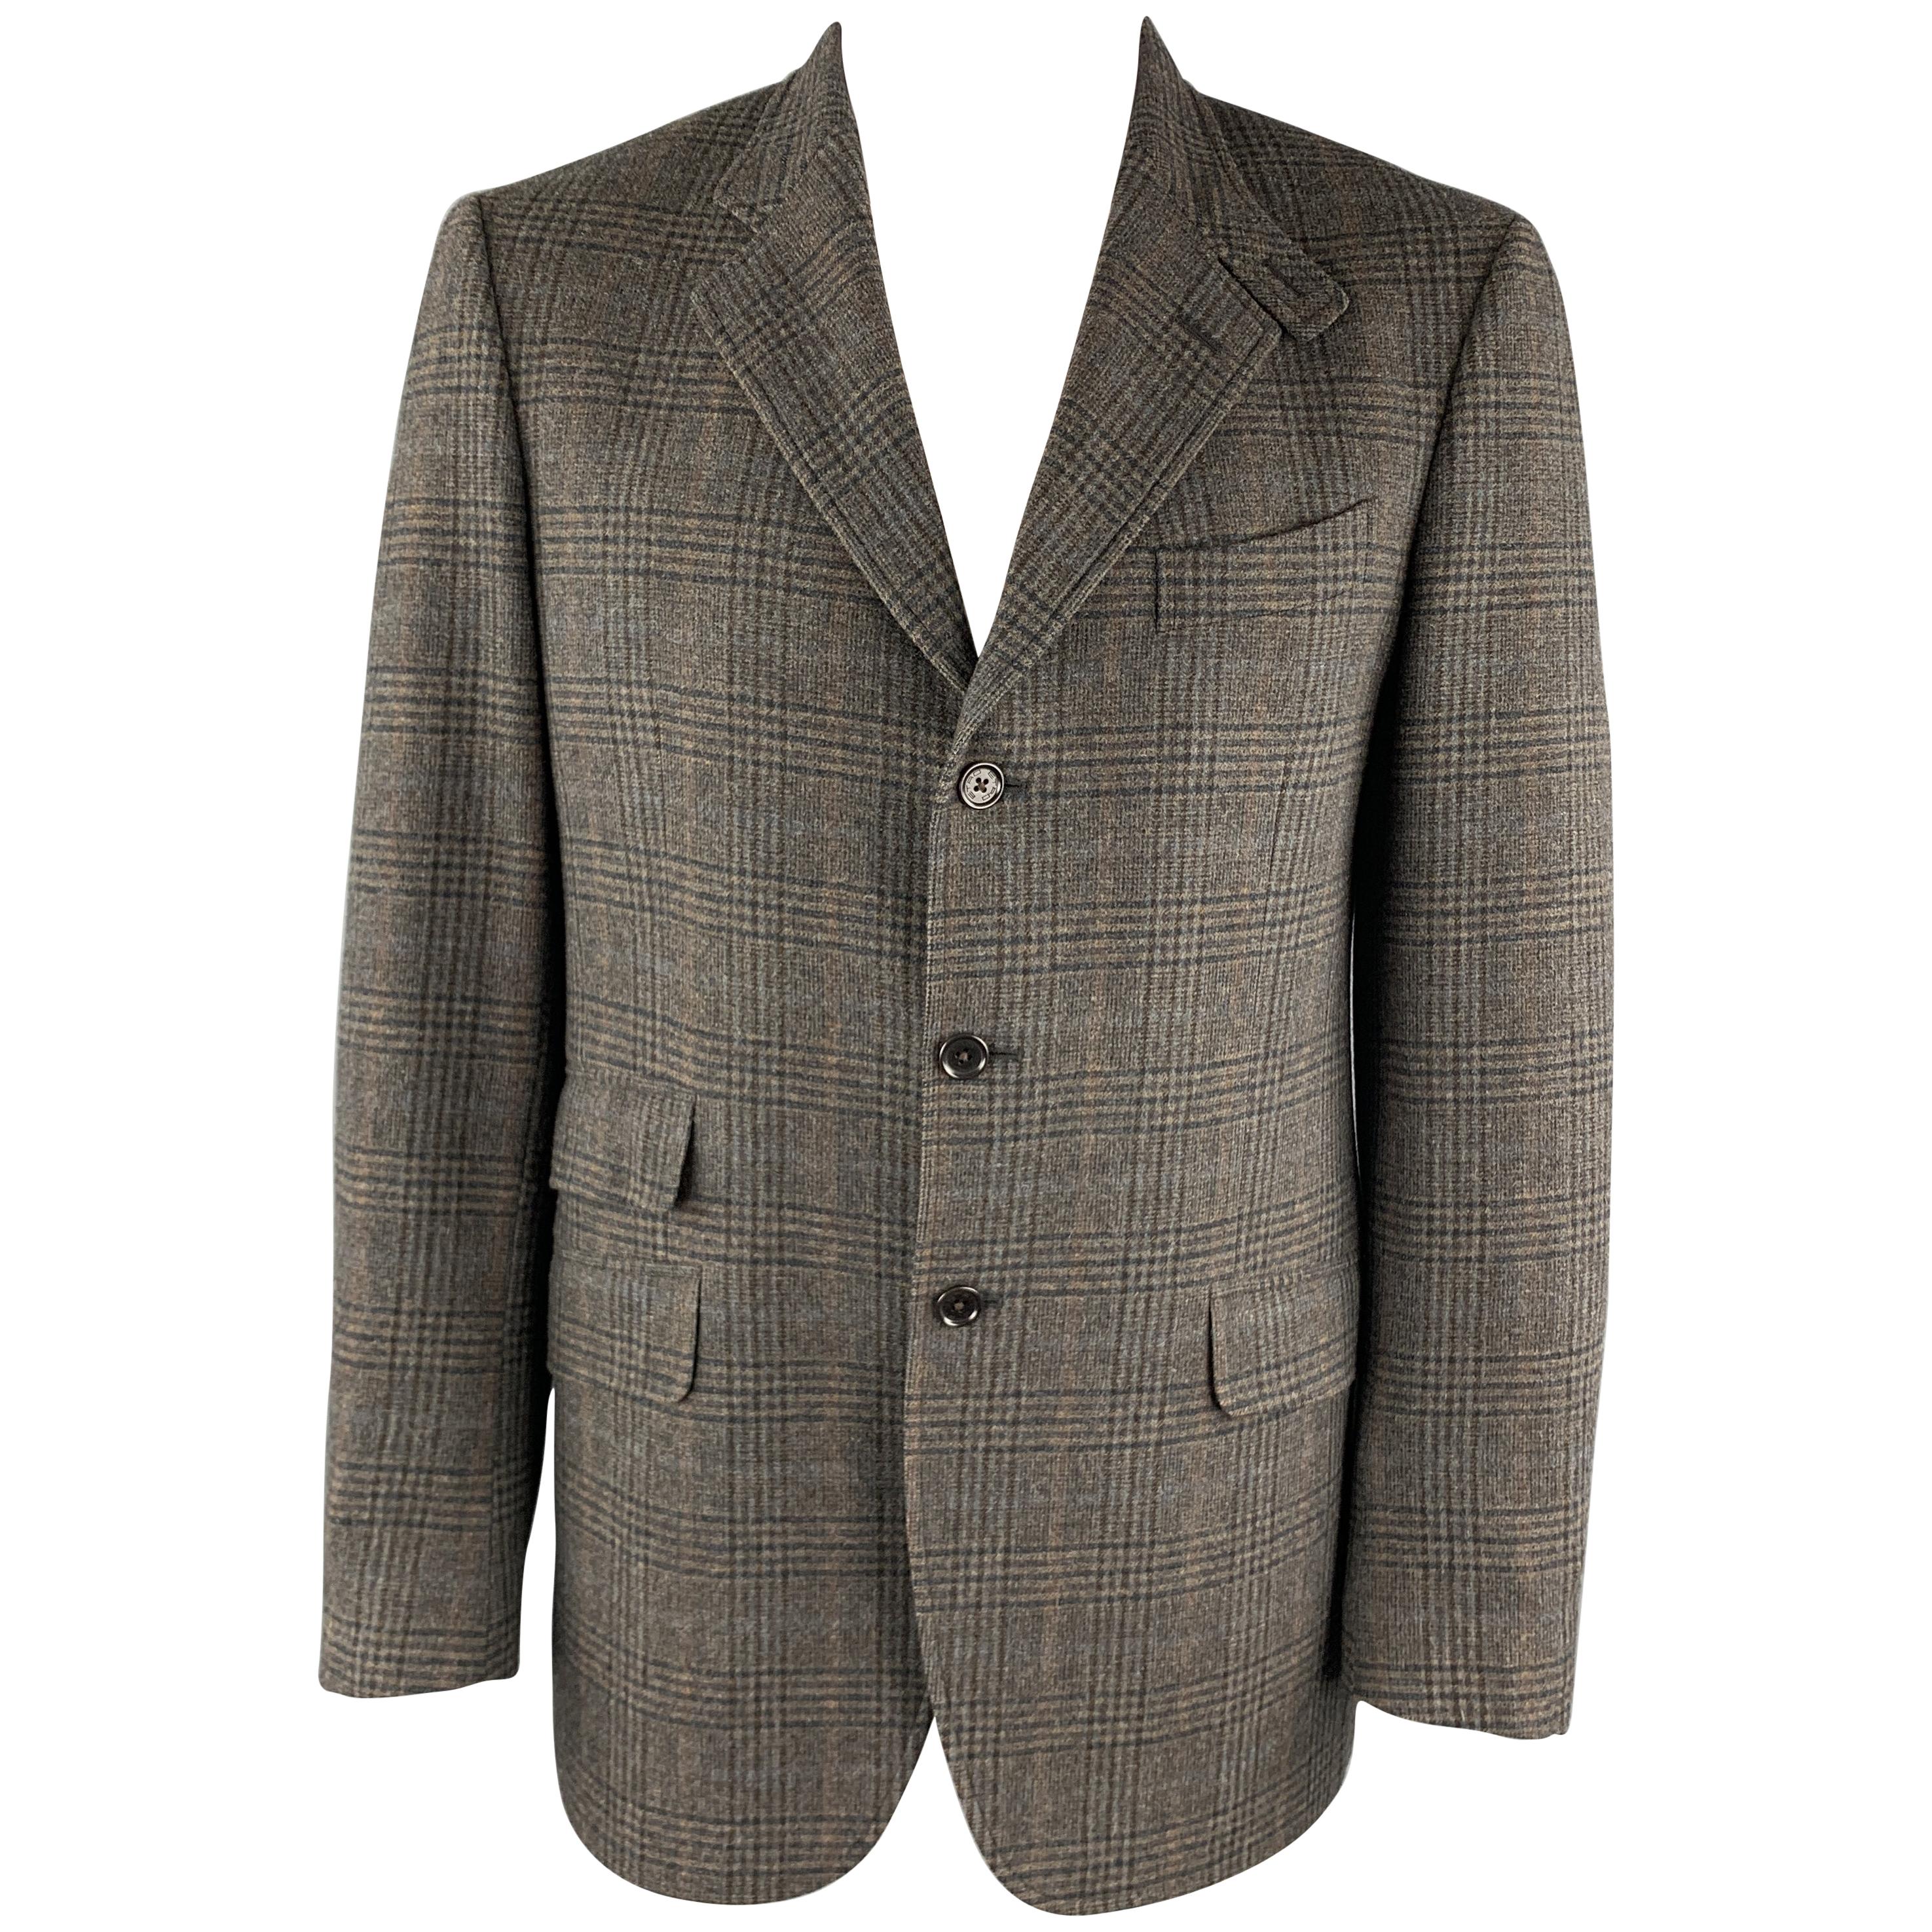 ETRO Size 42 Long Taupe Plaid Wool / Cashmere Tab Collar Sport Coat